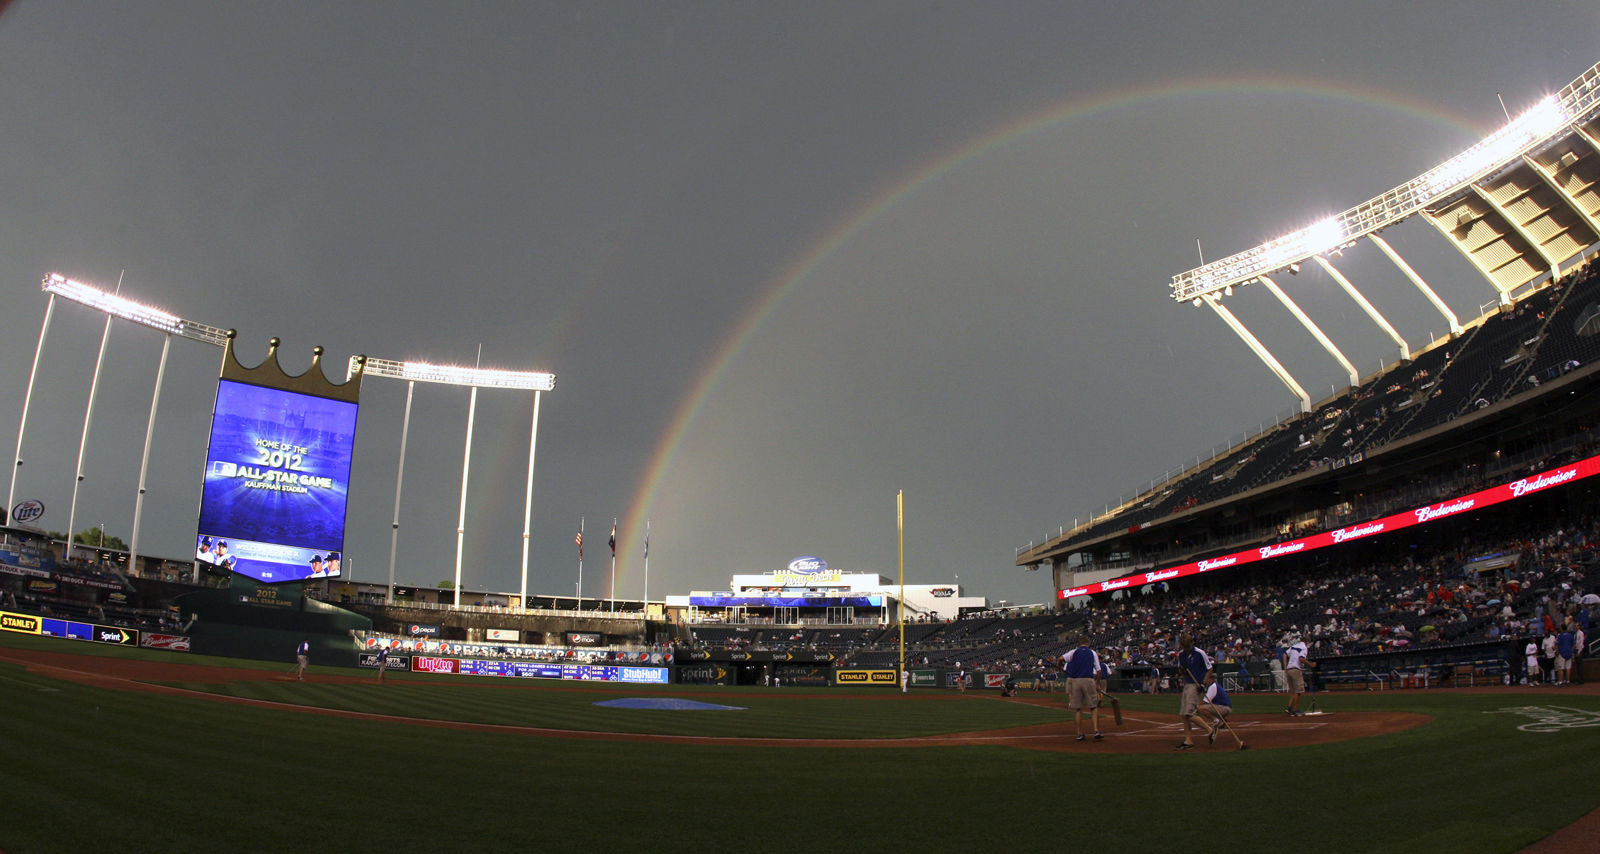 Kauffman Stadium, the home of the Kansas City Royals, comes in at No. 7 with an average cost of $77.67. File. (AP Photo/Ed Zurga)